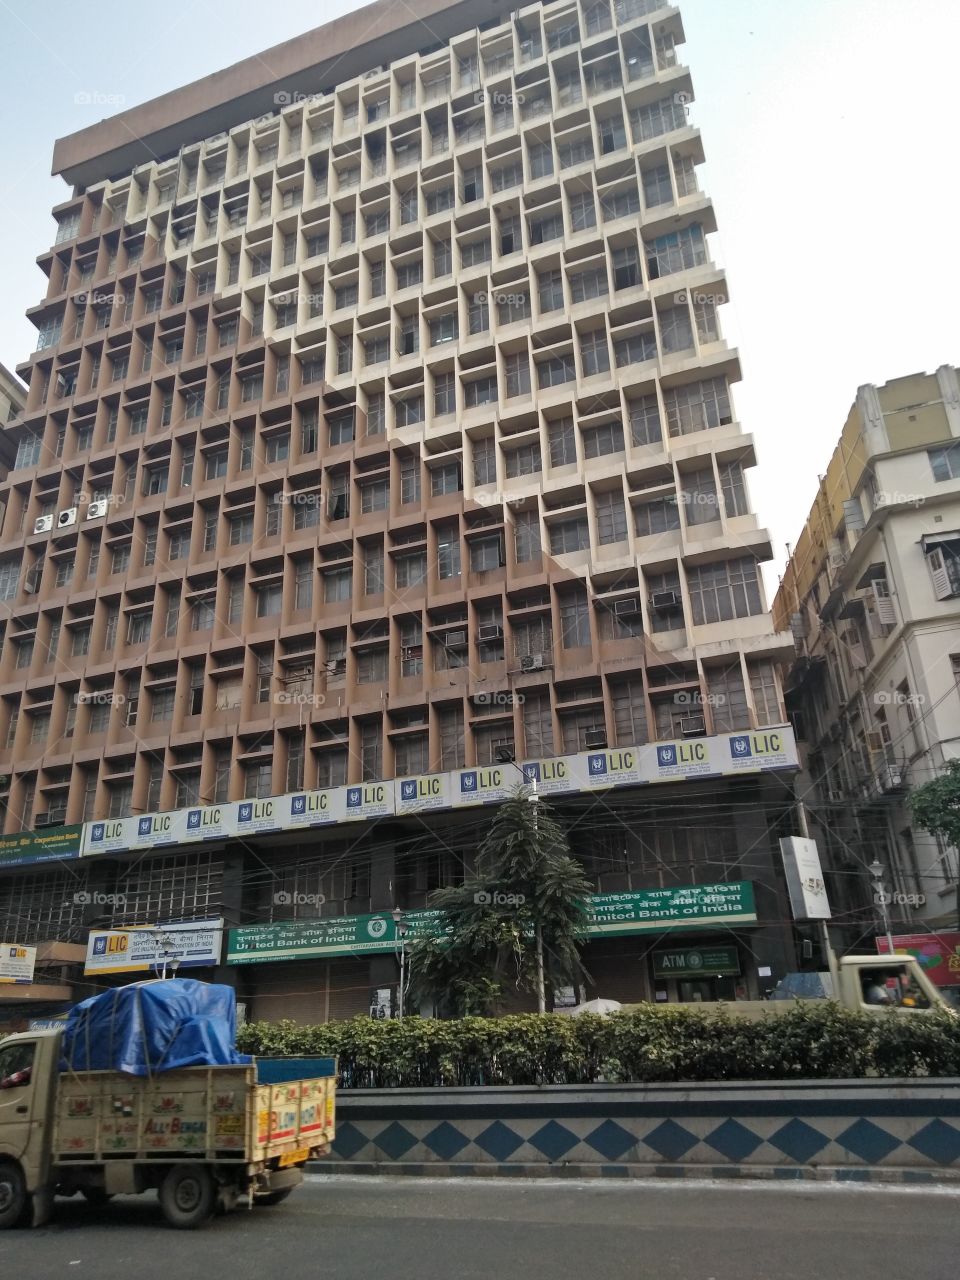 This LIC building on Central Avenue, Kolkata was on fire just 2 years back. But the electrical and signal cables are back again